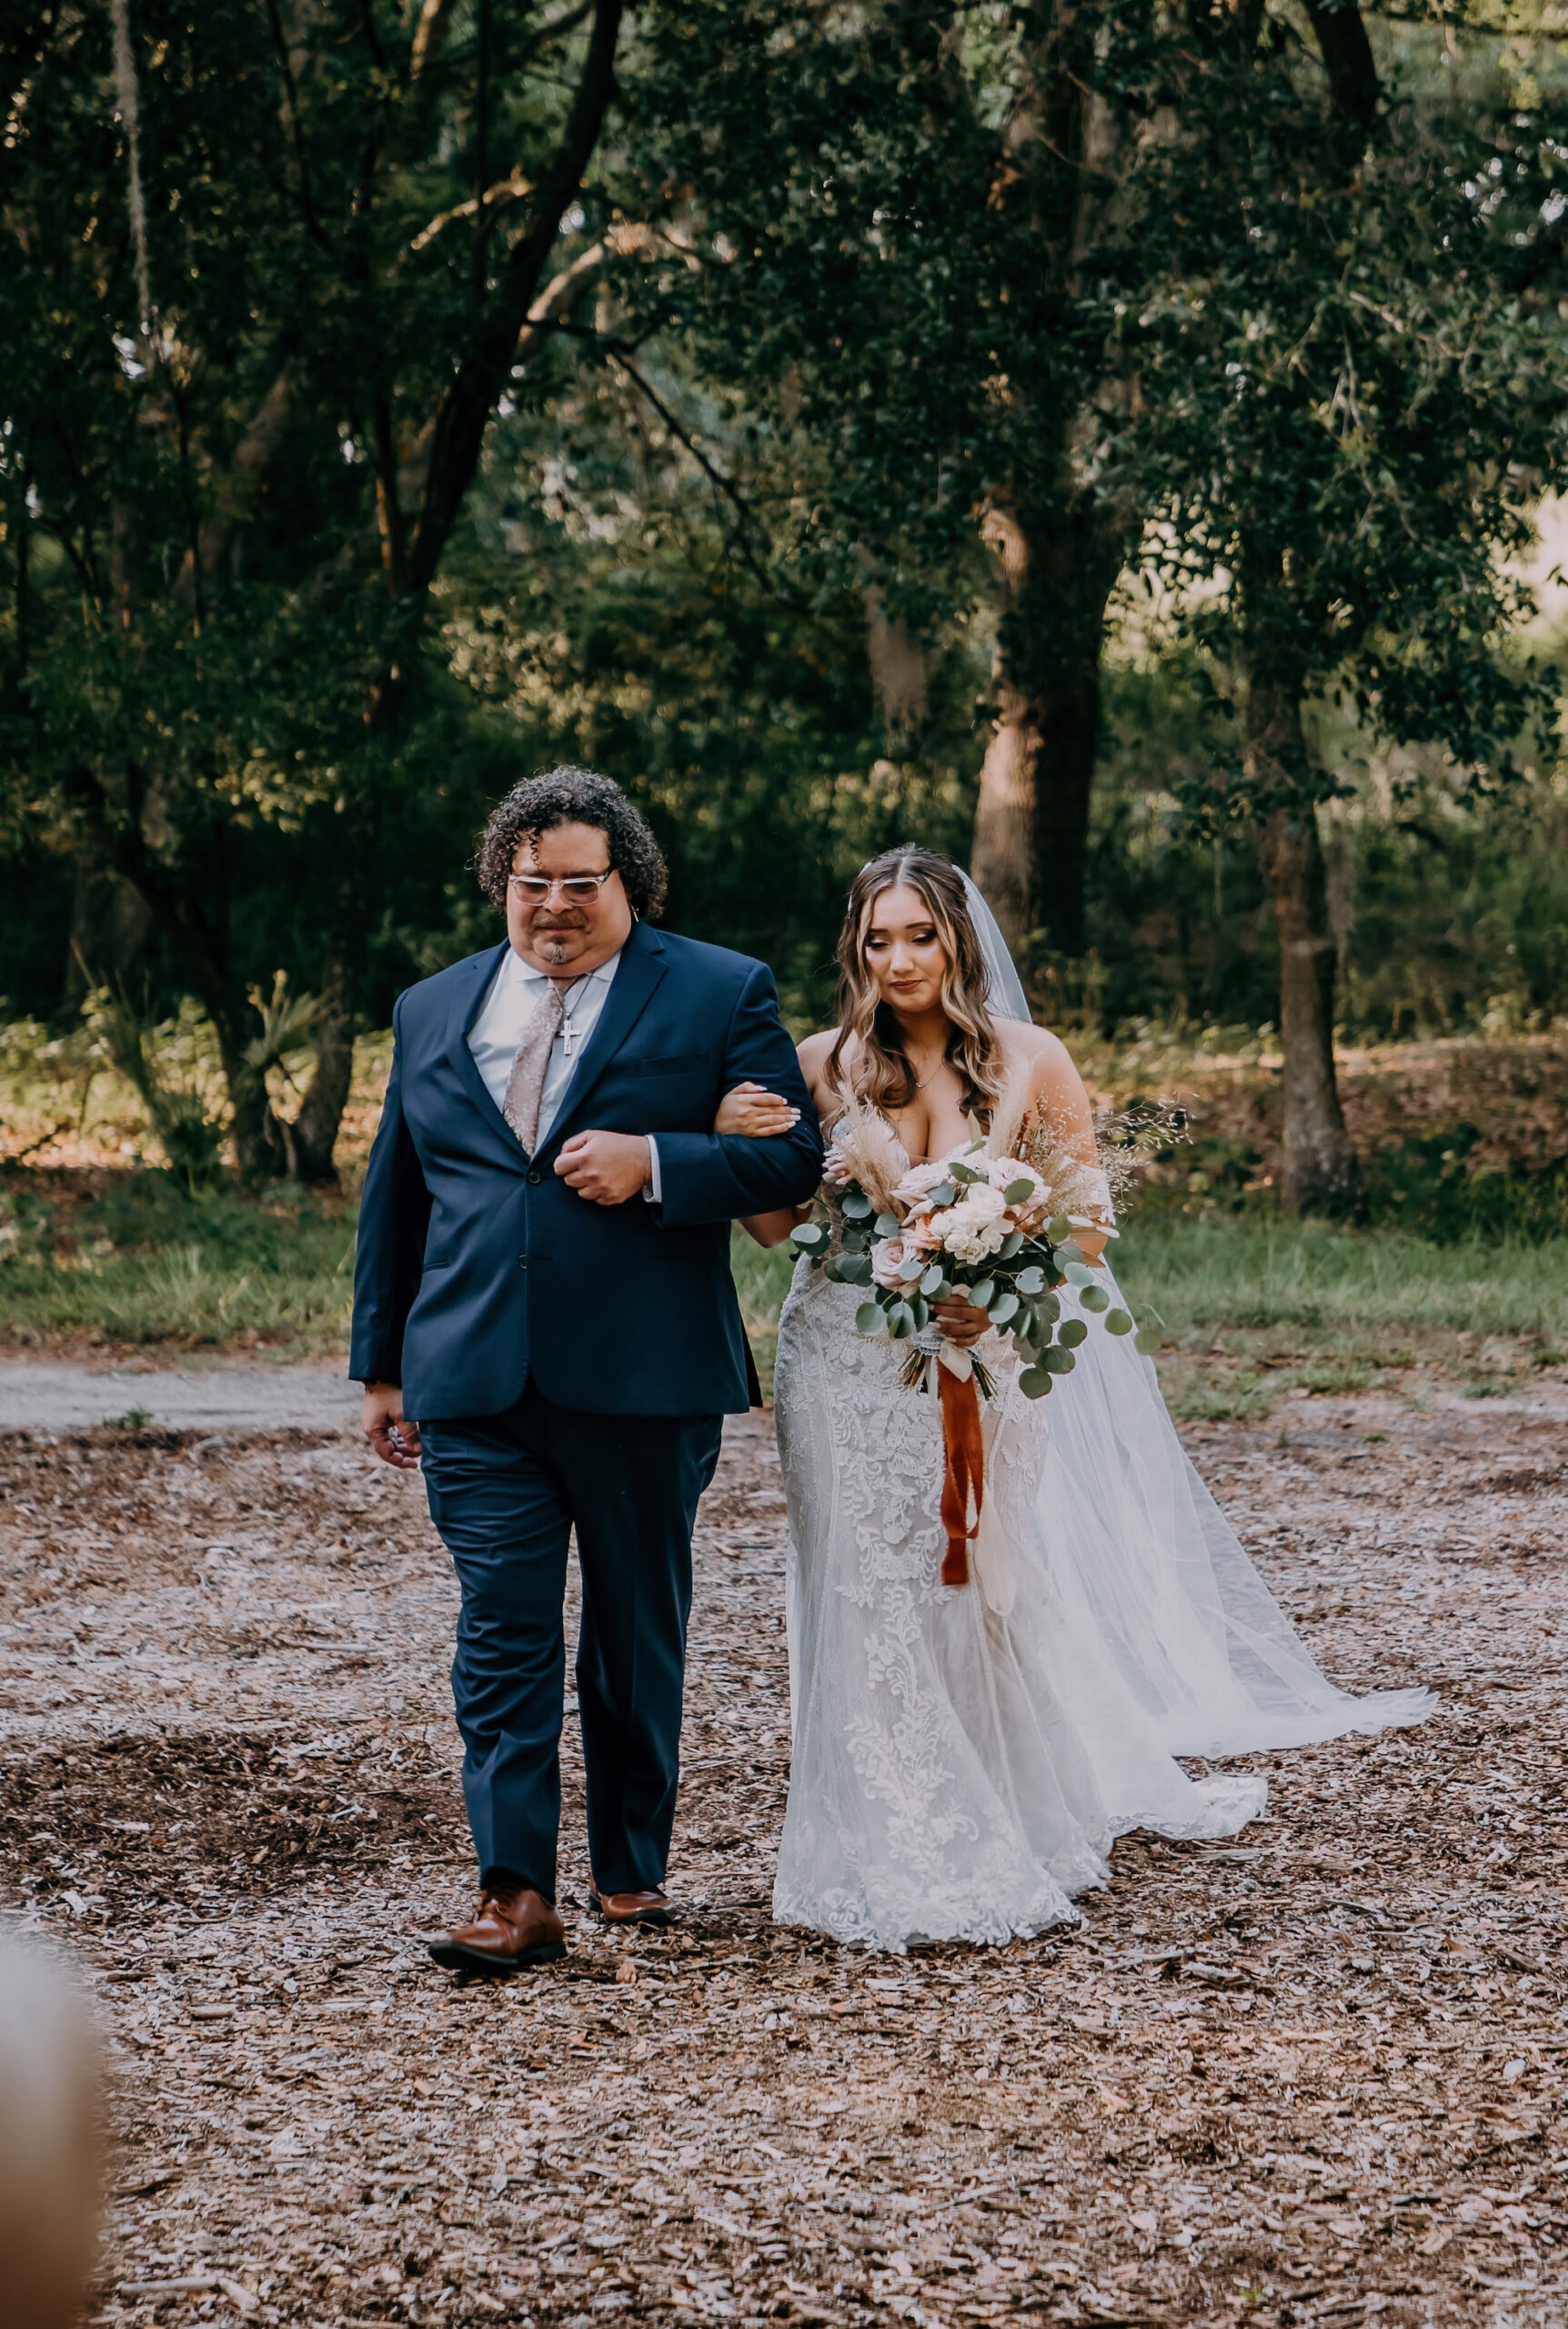 Boho Vintage Bride Walking with Father Down the Wedding Ceremony Aisle | Tampa Wedding Venue Mill Pond Estate